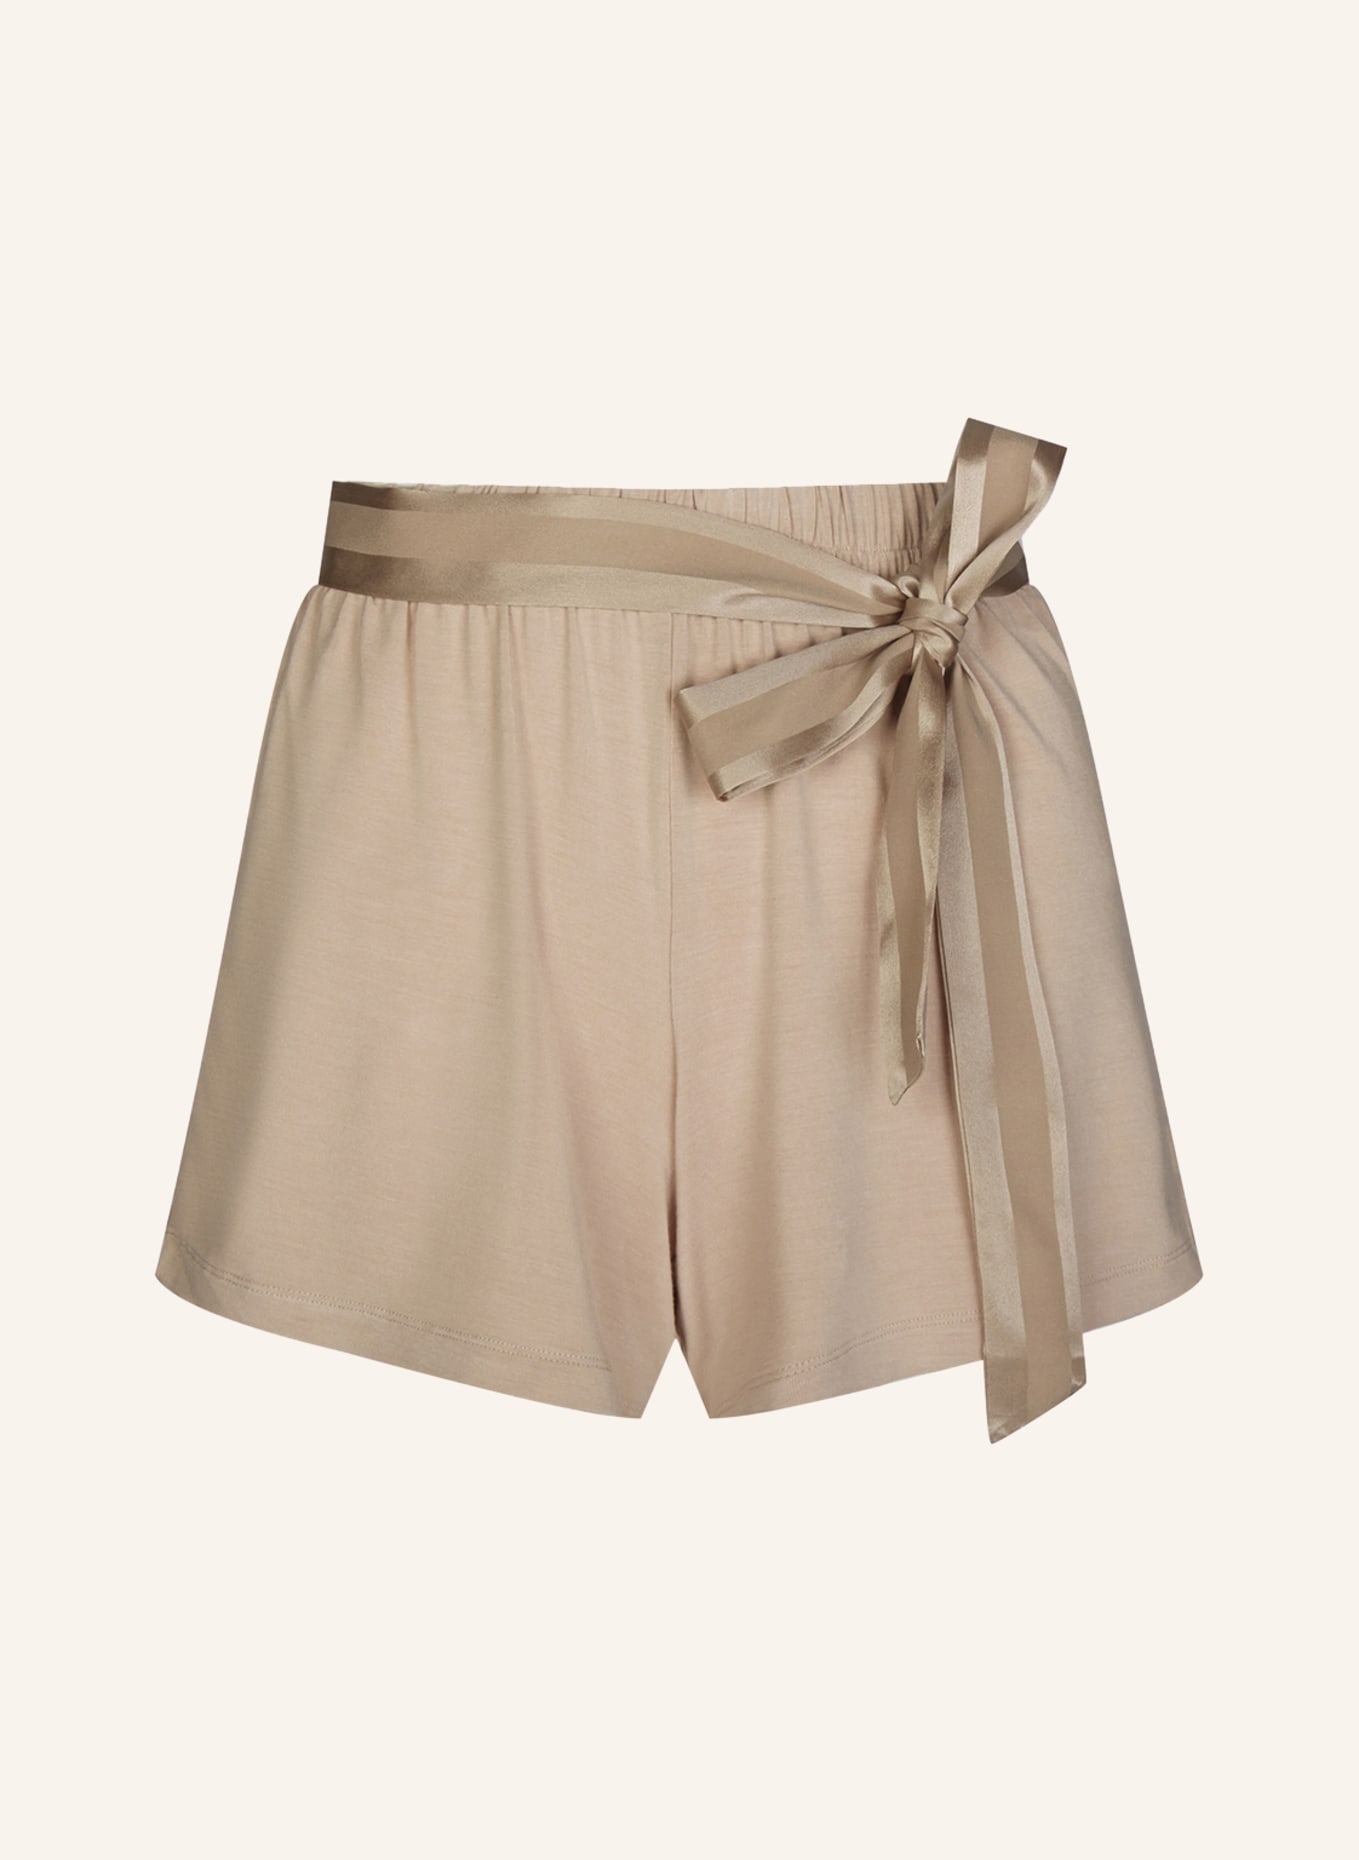 Marc & André Schlafshorts EASY PACE, Farbe: BEIGE (Bild 1)